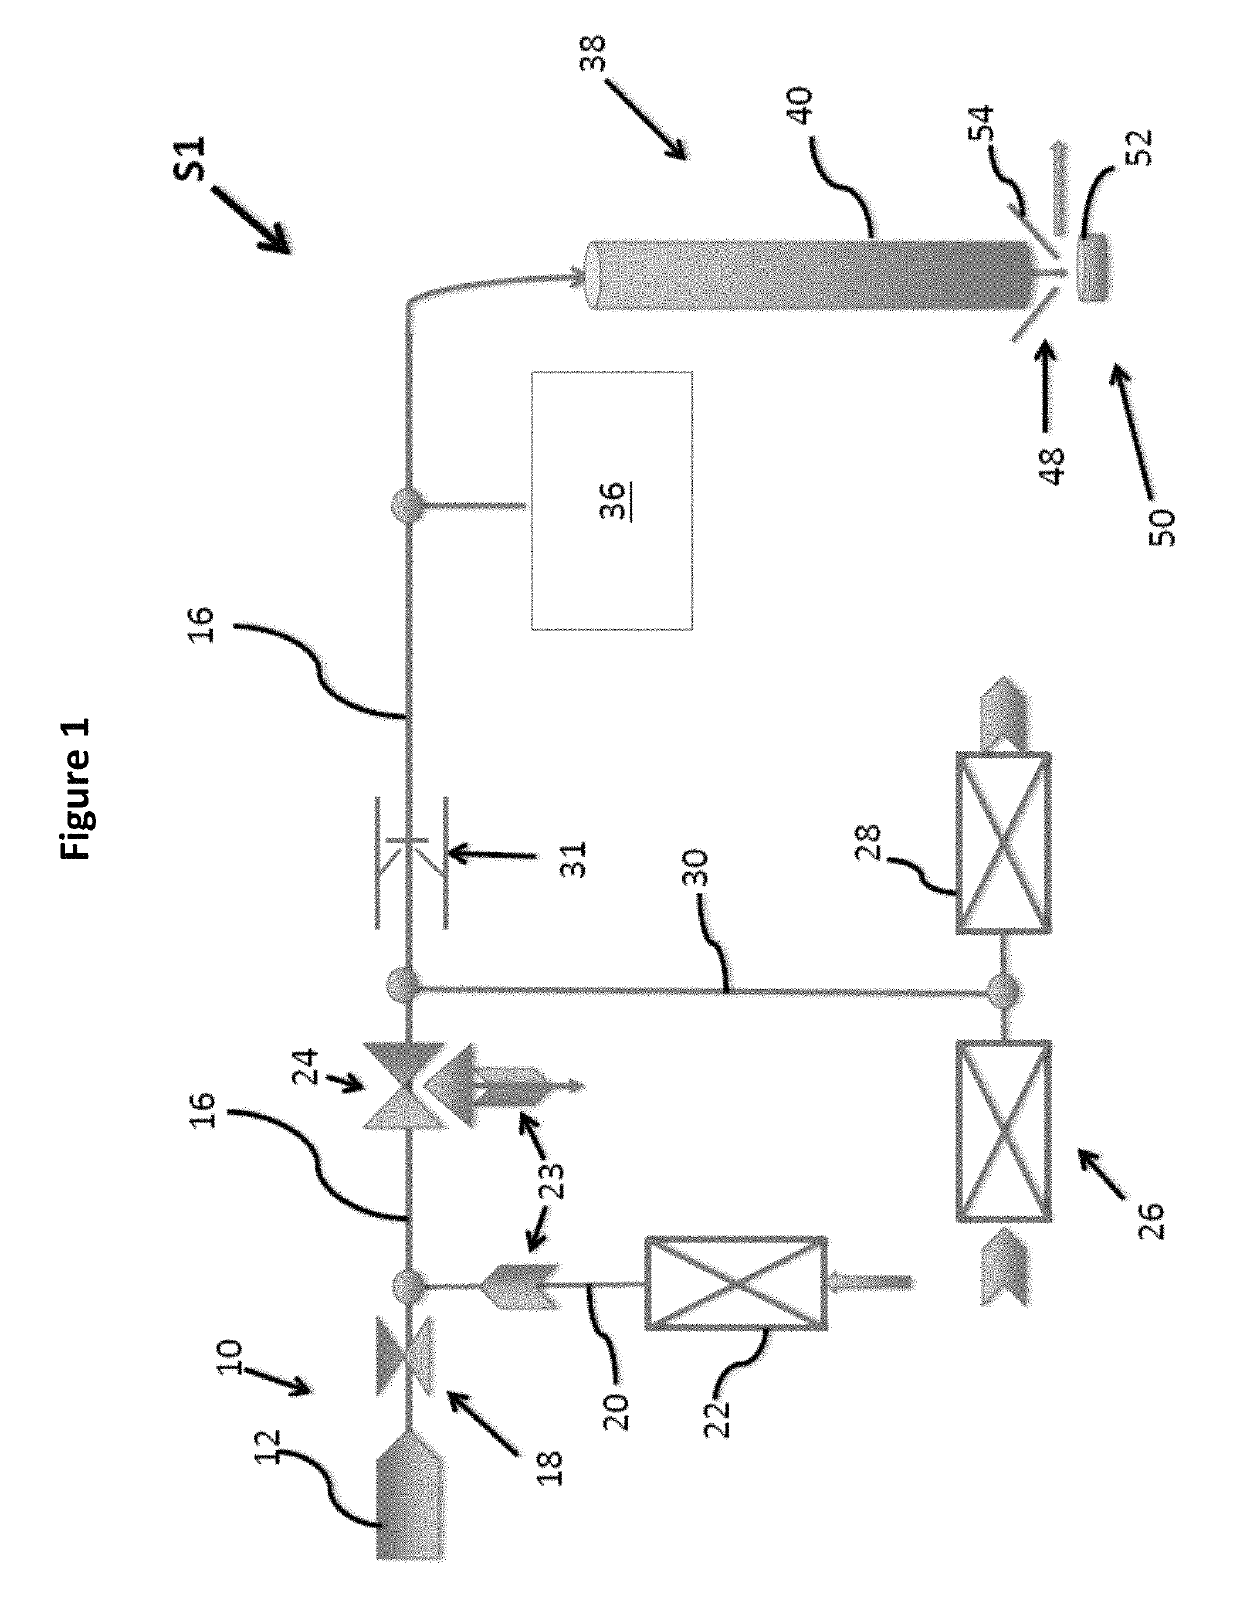 Aerosol collection system and method